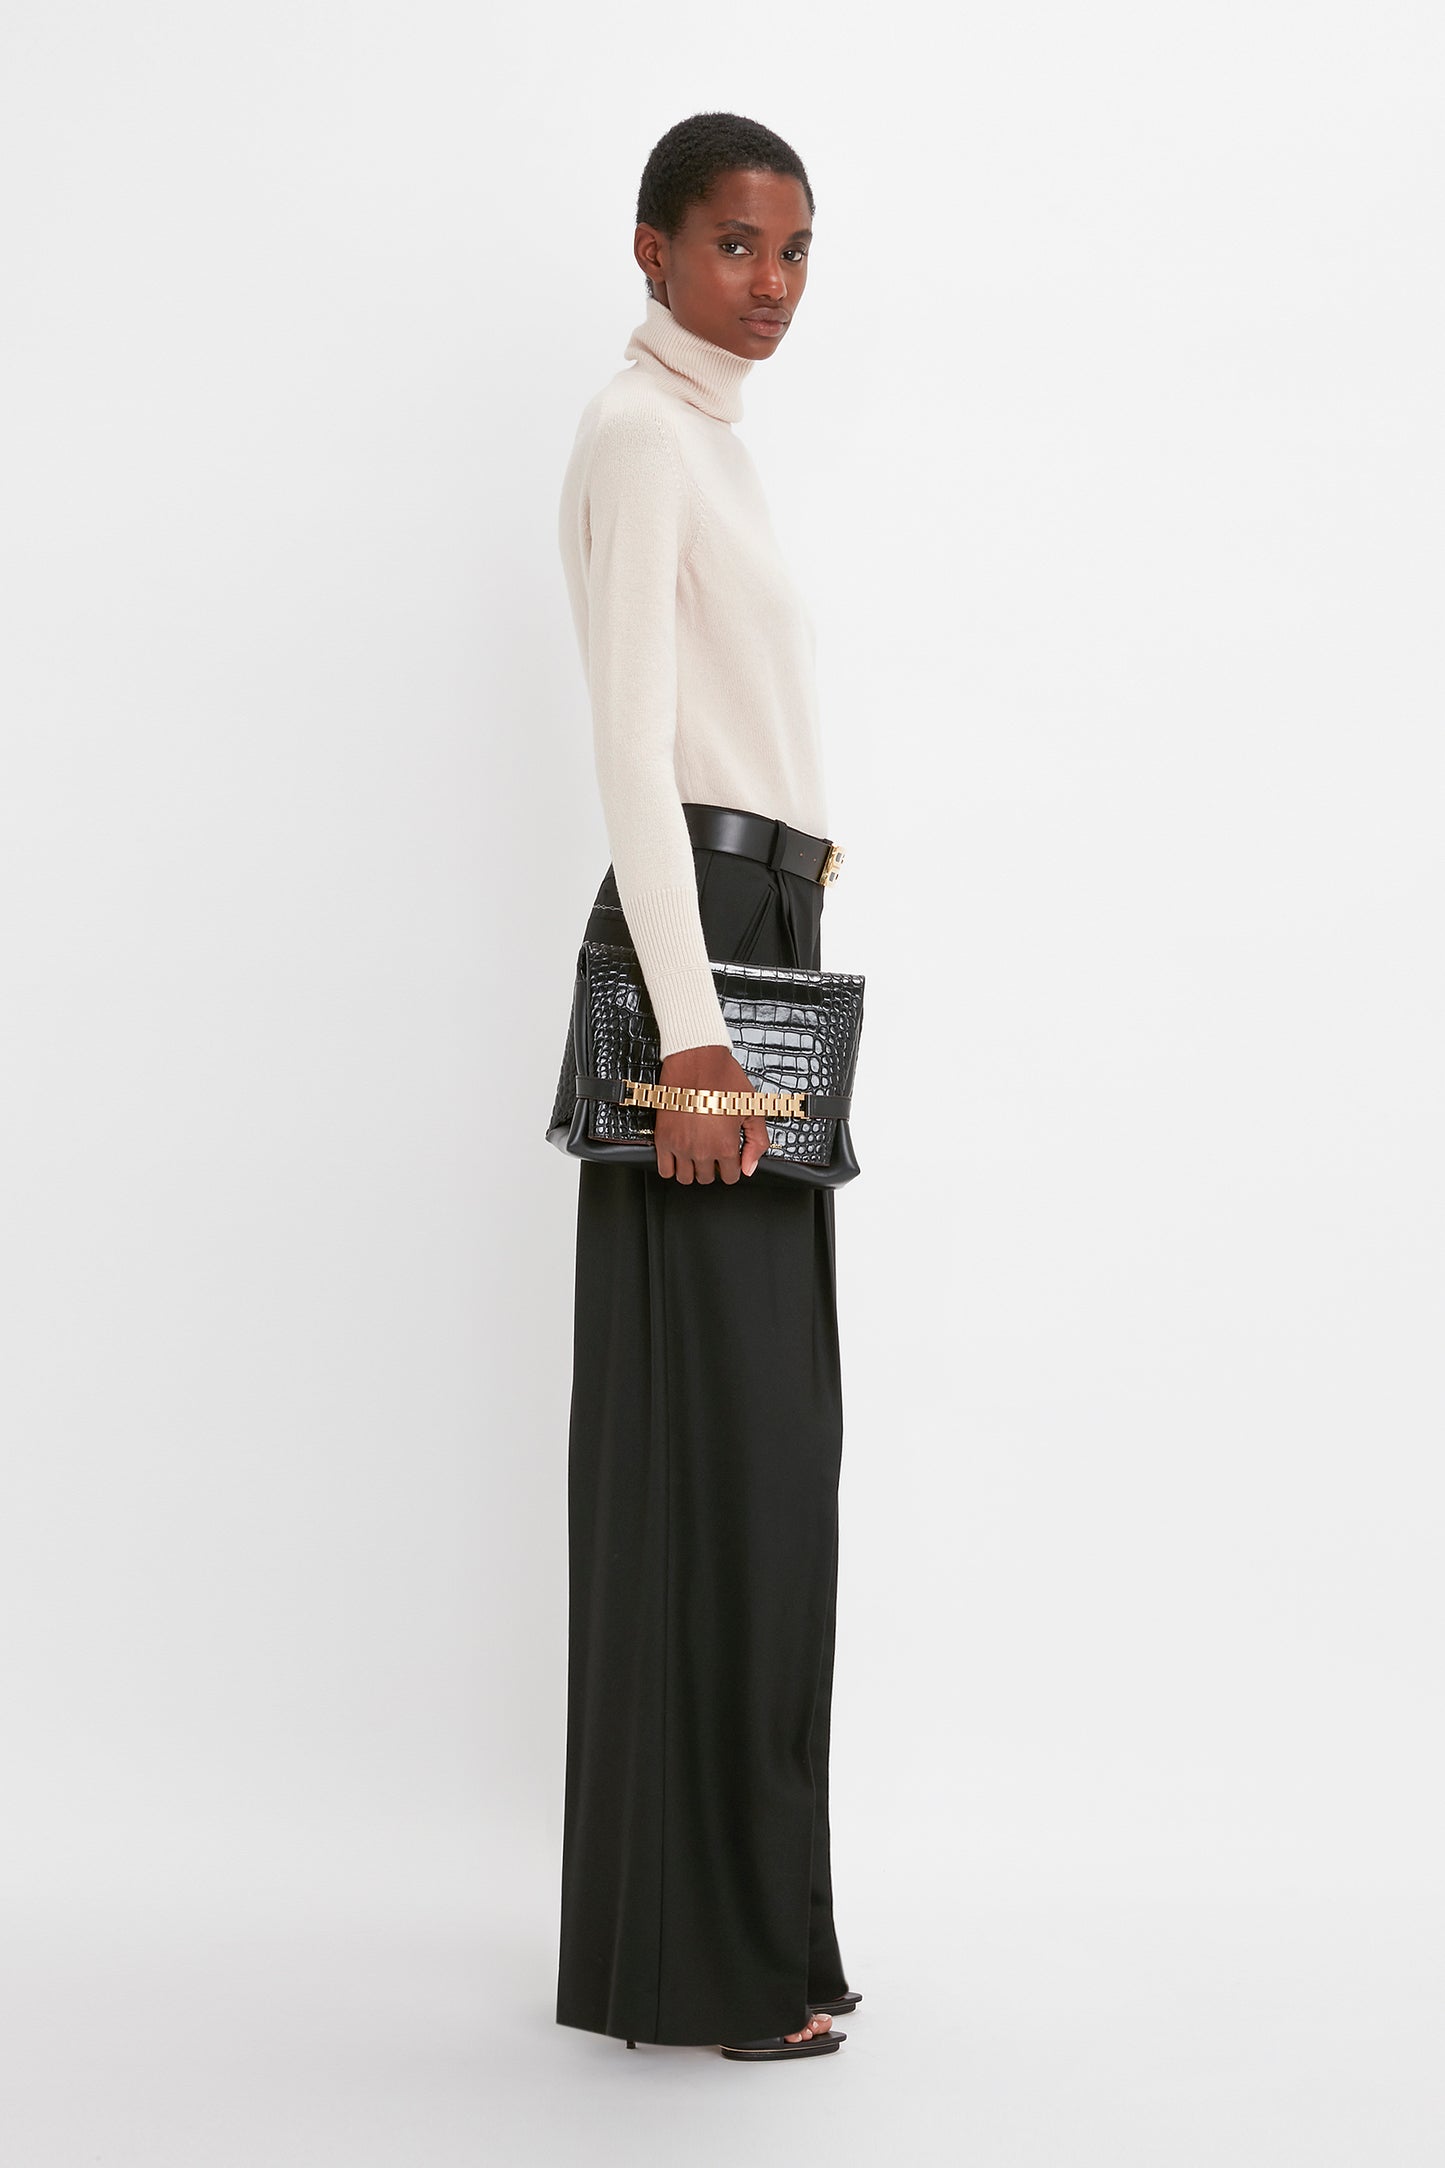 A woman in a cream Victoria Beckham polo neck jumper and black wide leg trousers, holding a black studded handbag, looking over her shoulder against a white background.